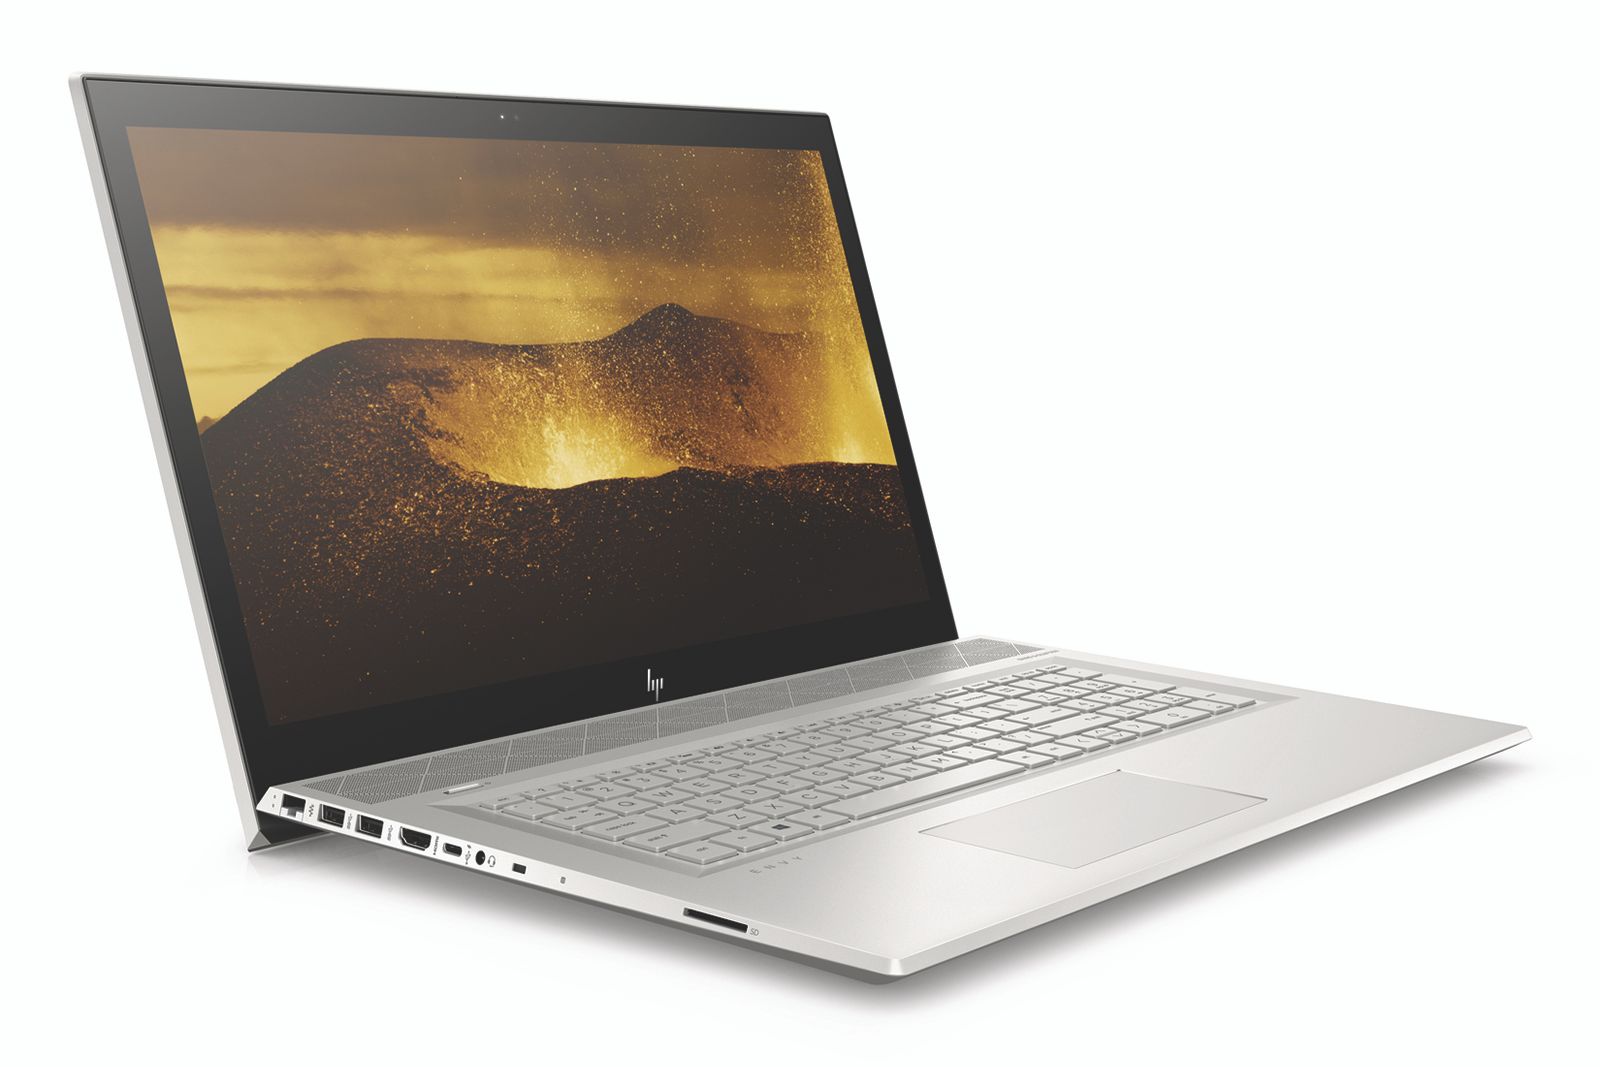 New Hp Envy 15 17 And X360 Models Promise Great Battery Life And Up To 4k Resolutions image 3